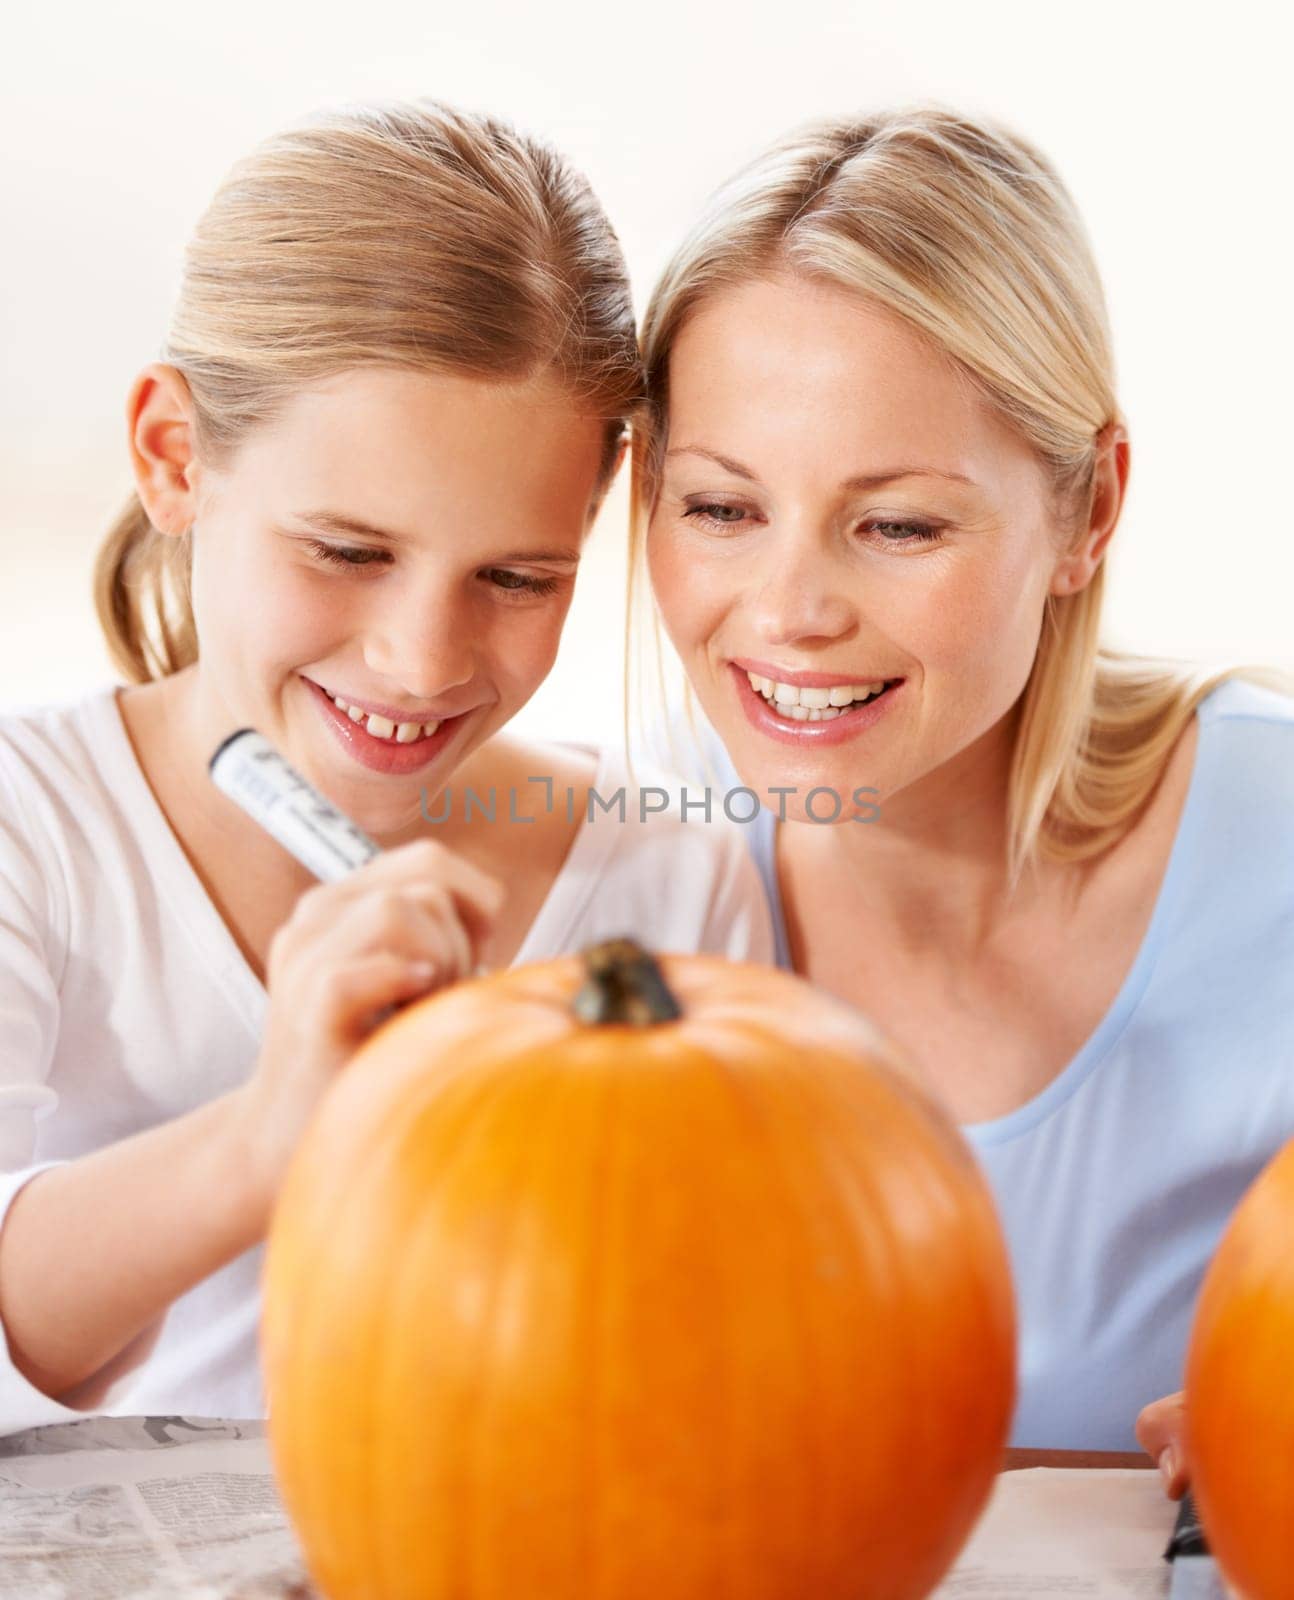 Child, mother and smile for drawing on pumpkin, craft and celebrate halloween party at home. Happy girl kid, mom or family writing with pen marker on vegetable, holiday lantern or creative decoration.